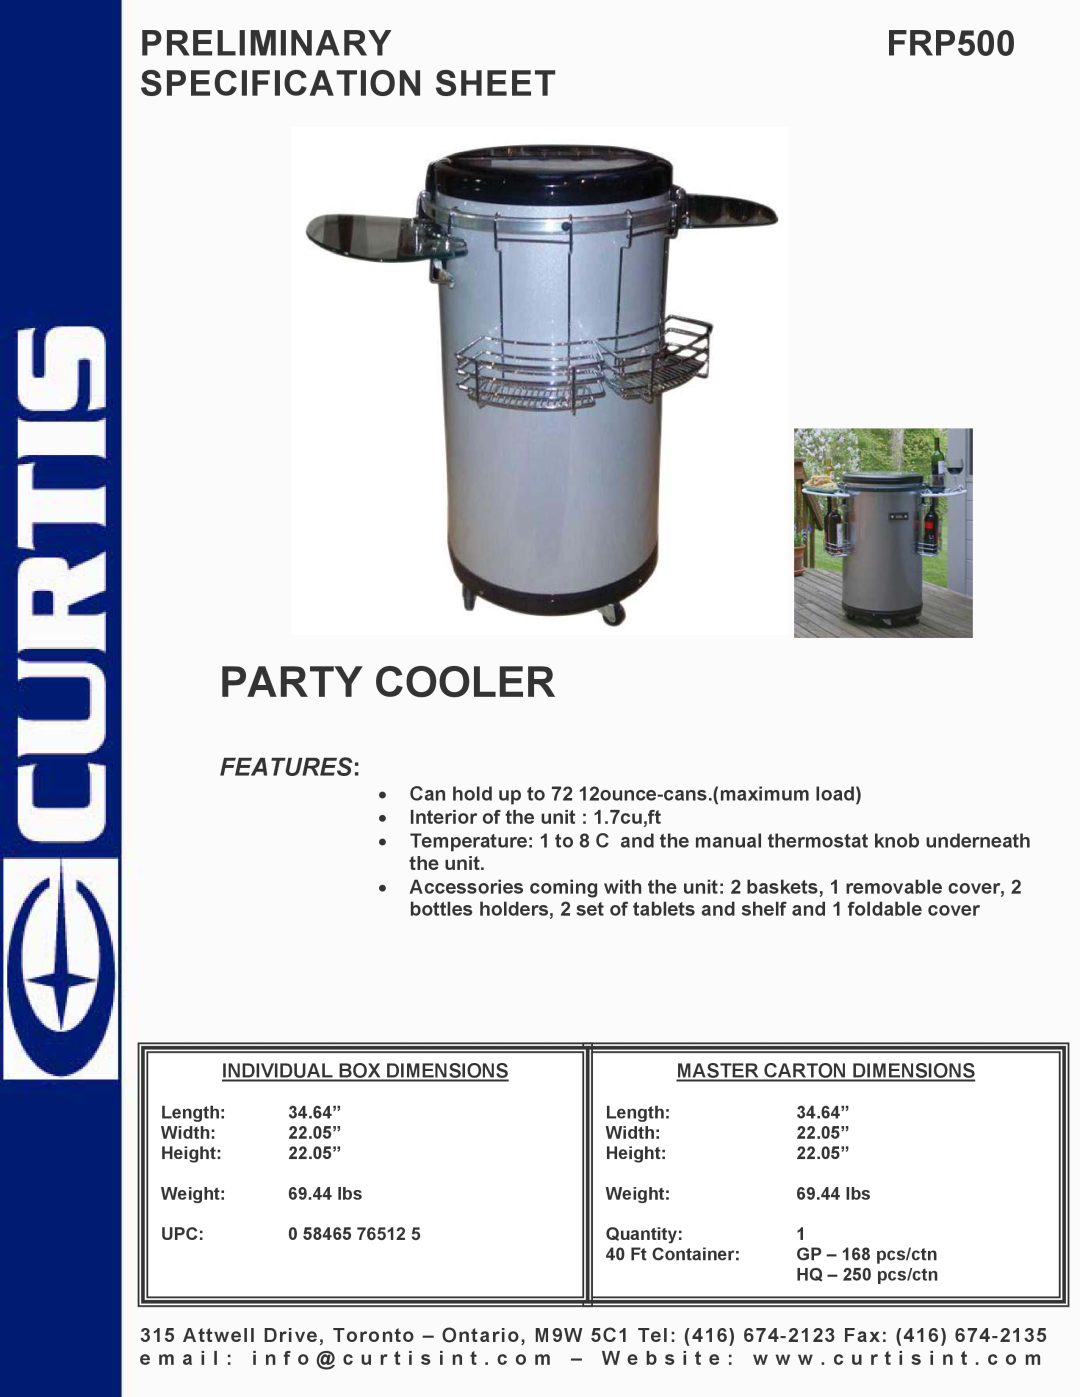 Curtis specifications Party Cooler, PRELIMINARYFRP500 SPECIFICATION SHEET, Features 